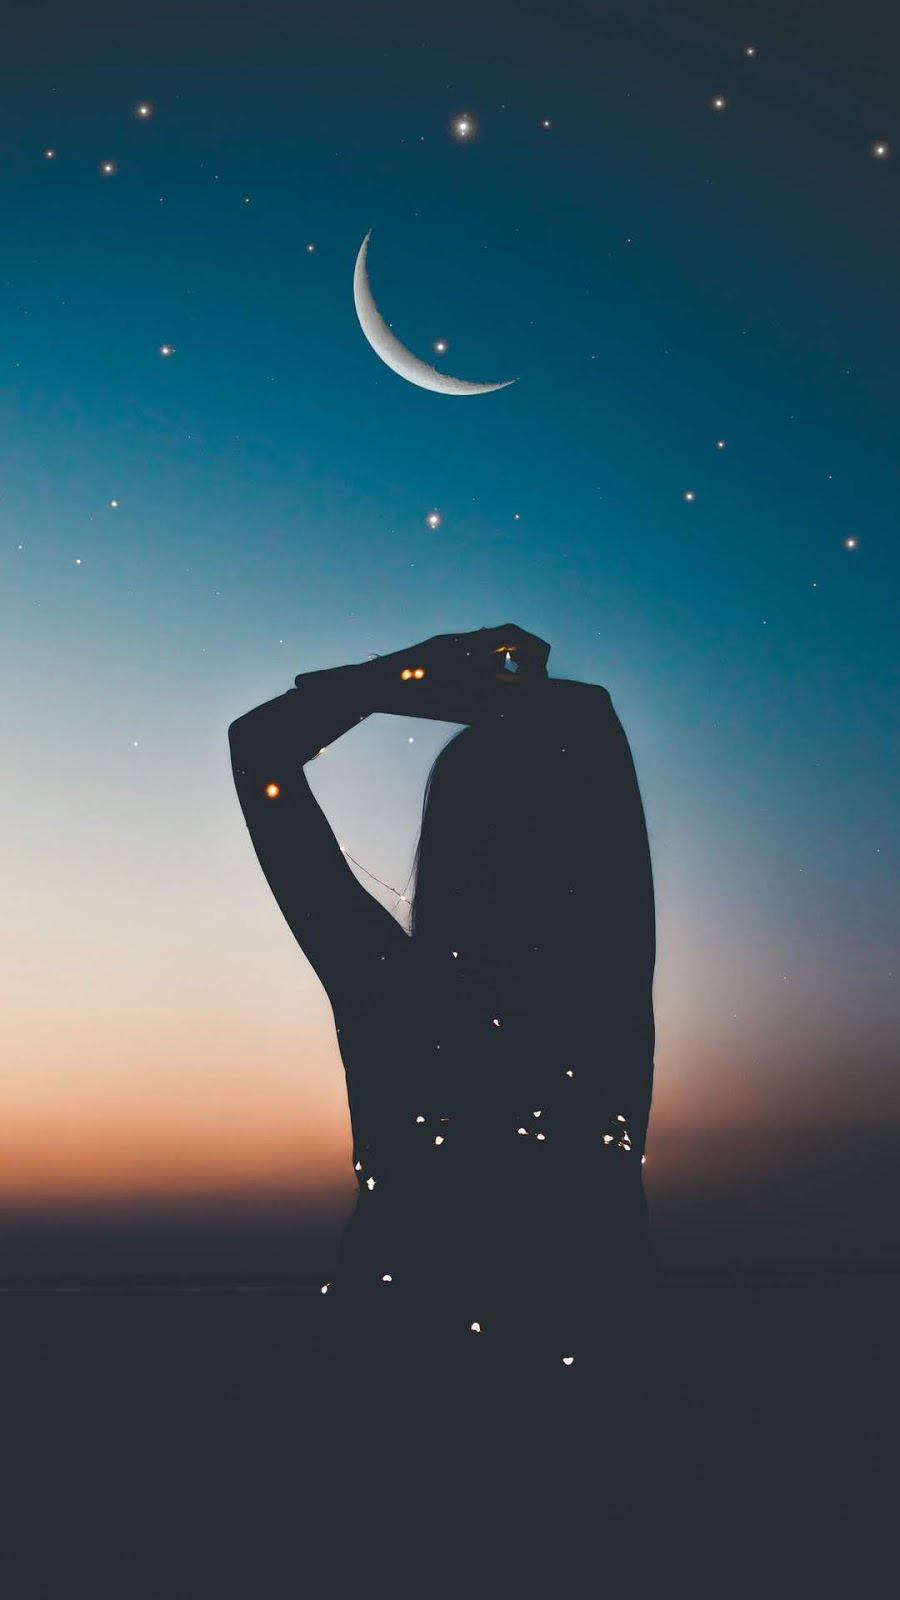 best hd wallpapers for android download,sky,moon,crescent,night,moonlight